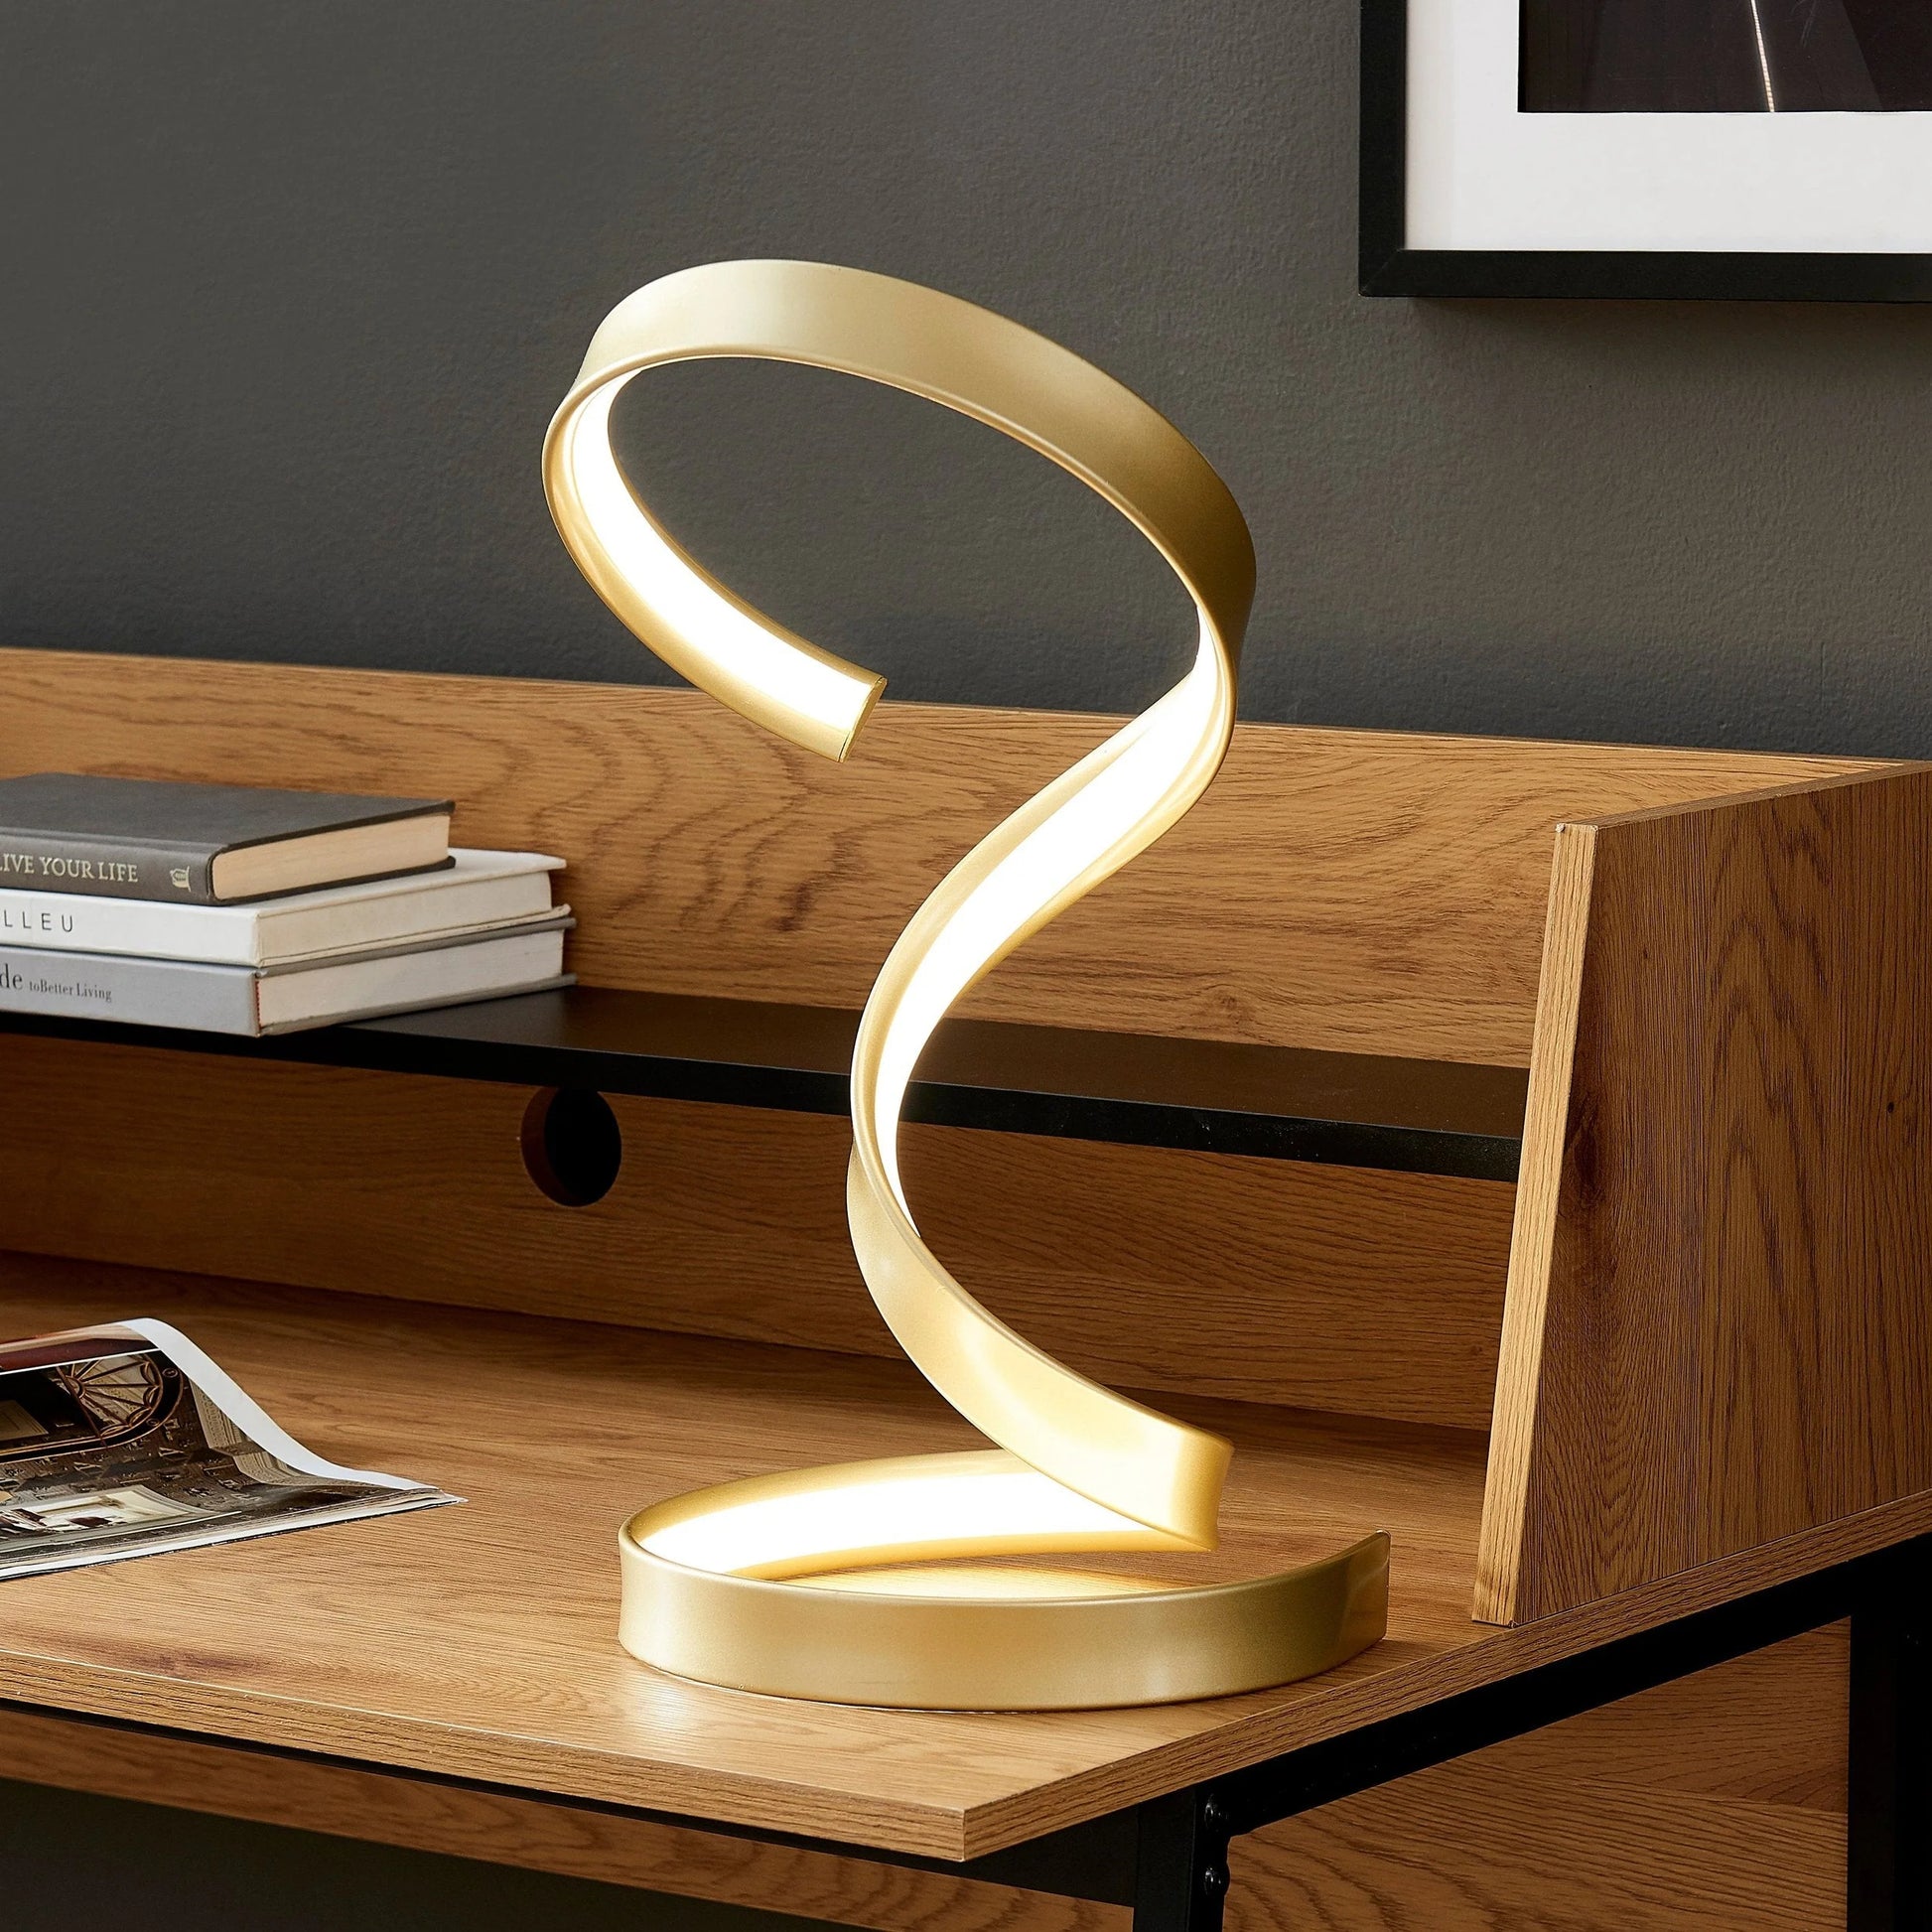 Finesse Decor Hamburg Gold Table Lamp in LED Strip - Dimmable 2